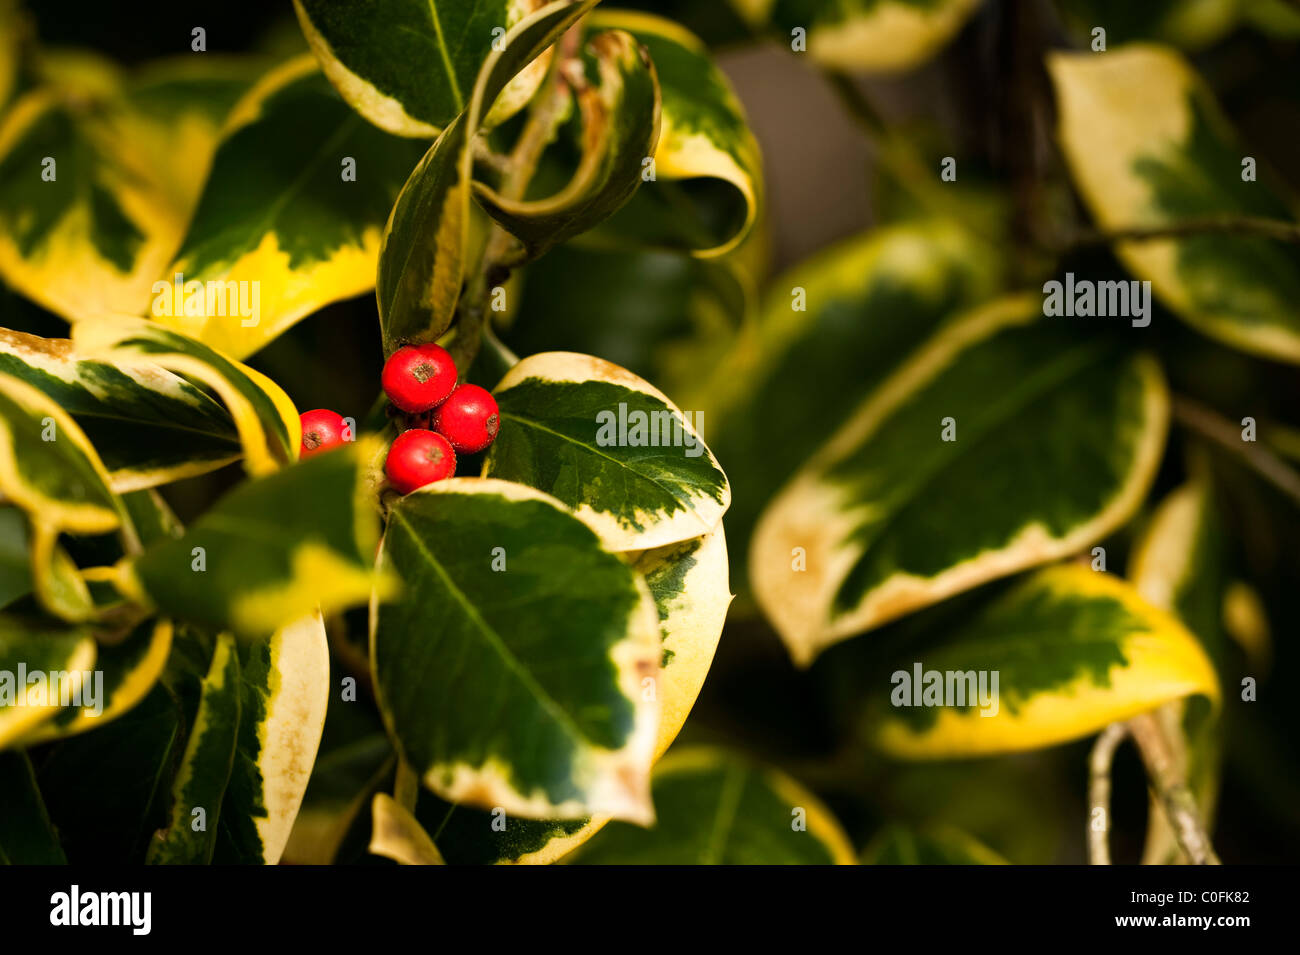 Ilex x altaclerensis 'Golden King', Variegated Highclere Holly, in Winter Stock Photo